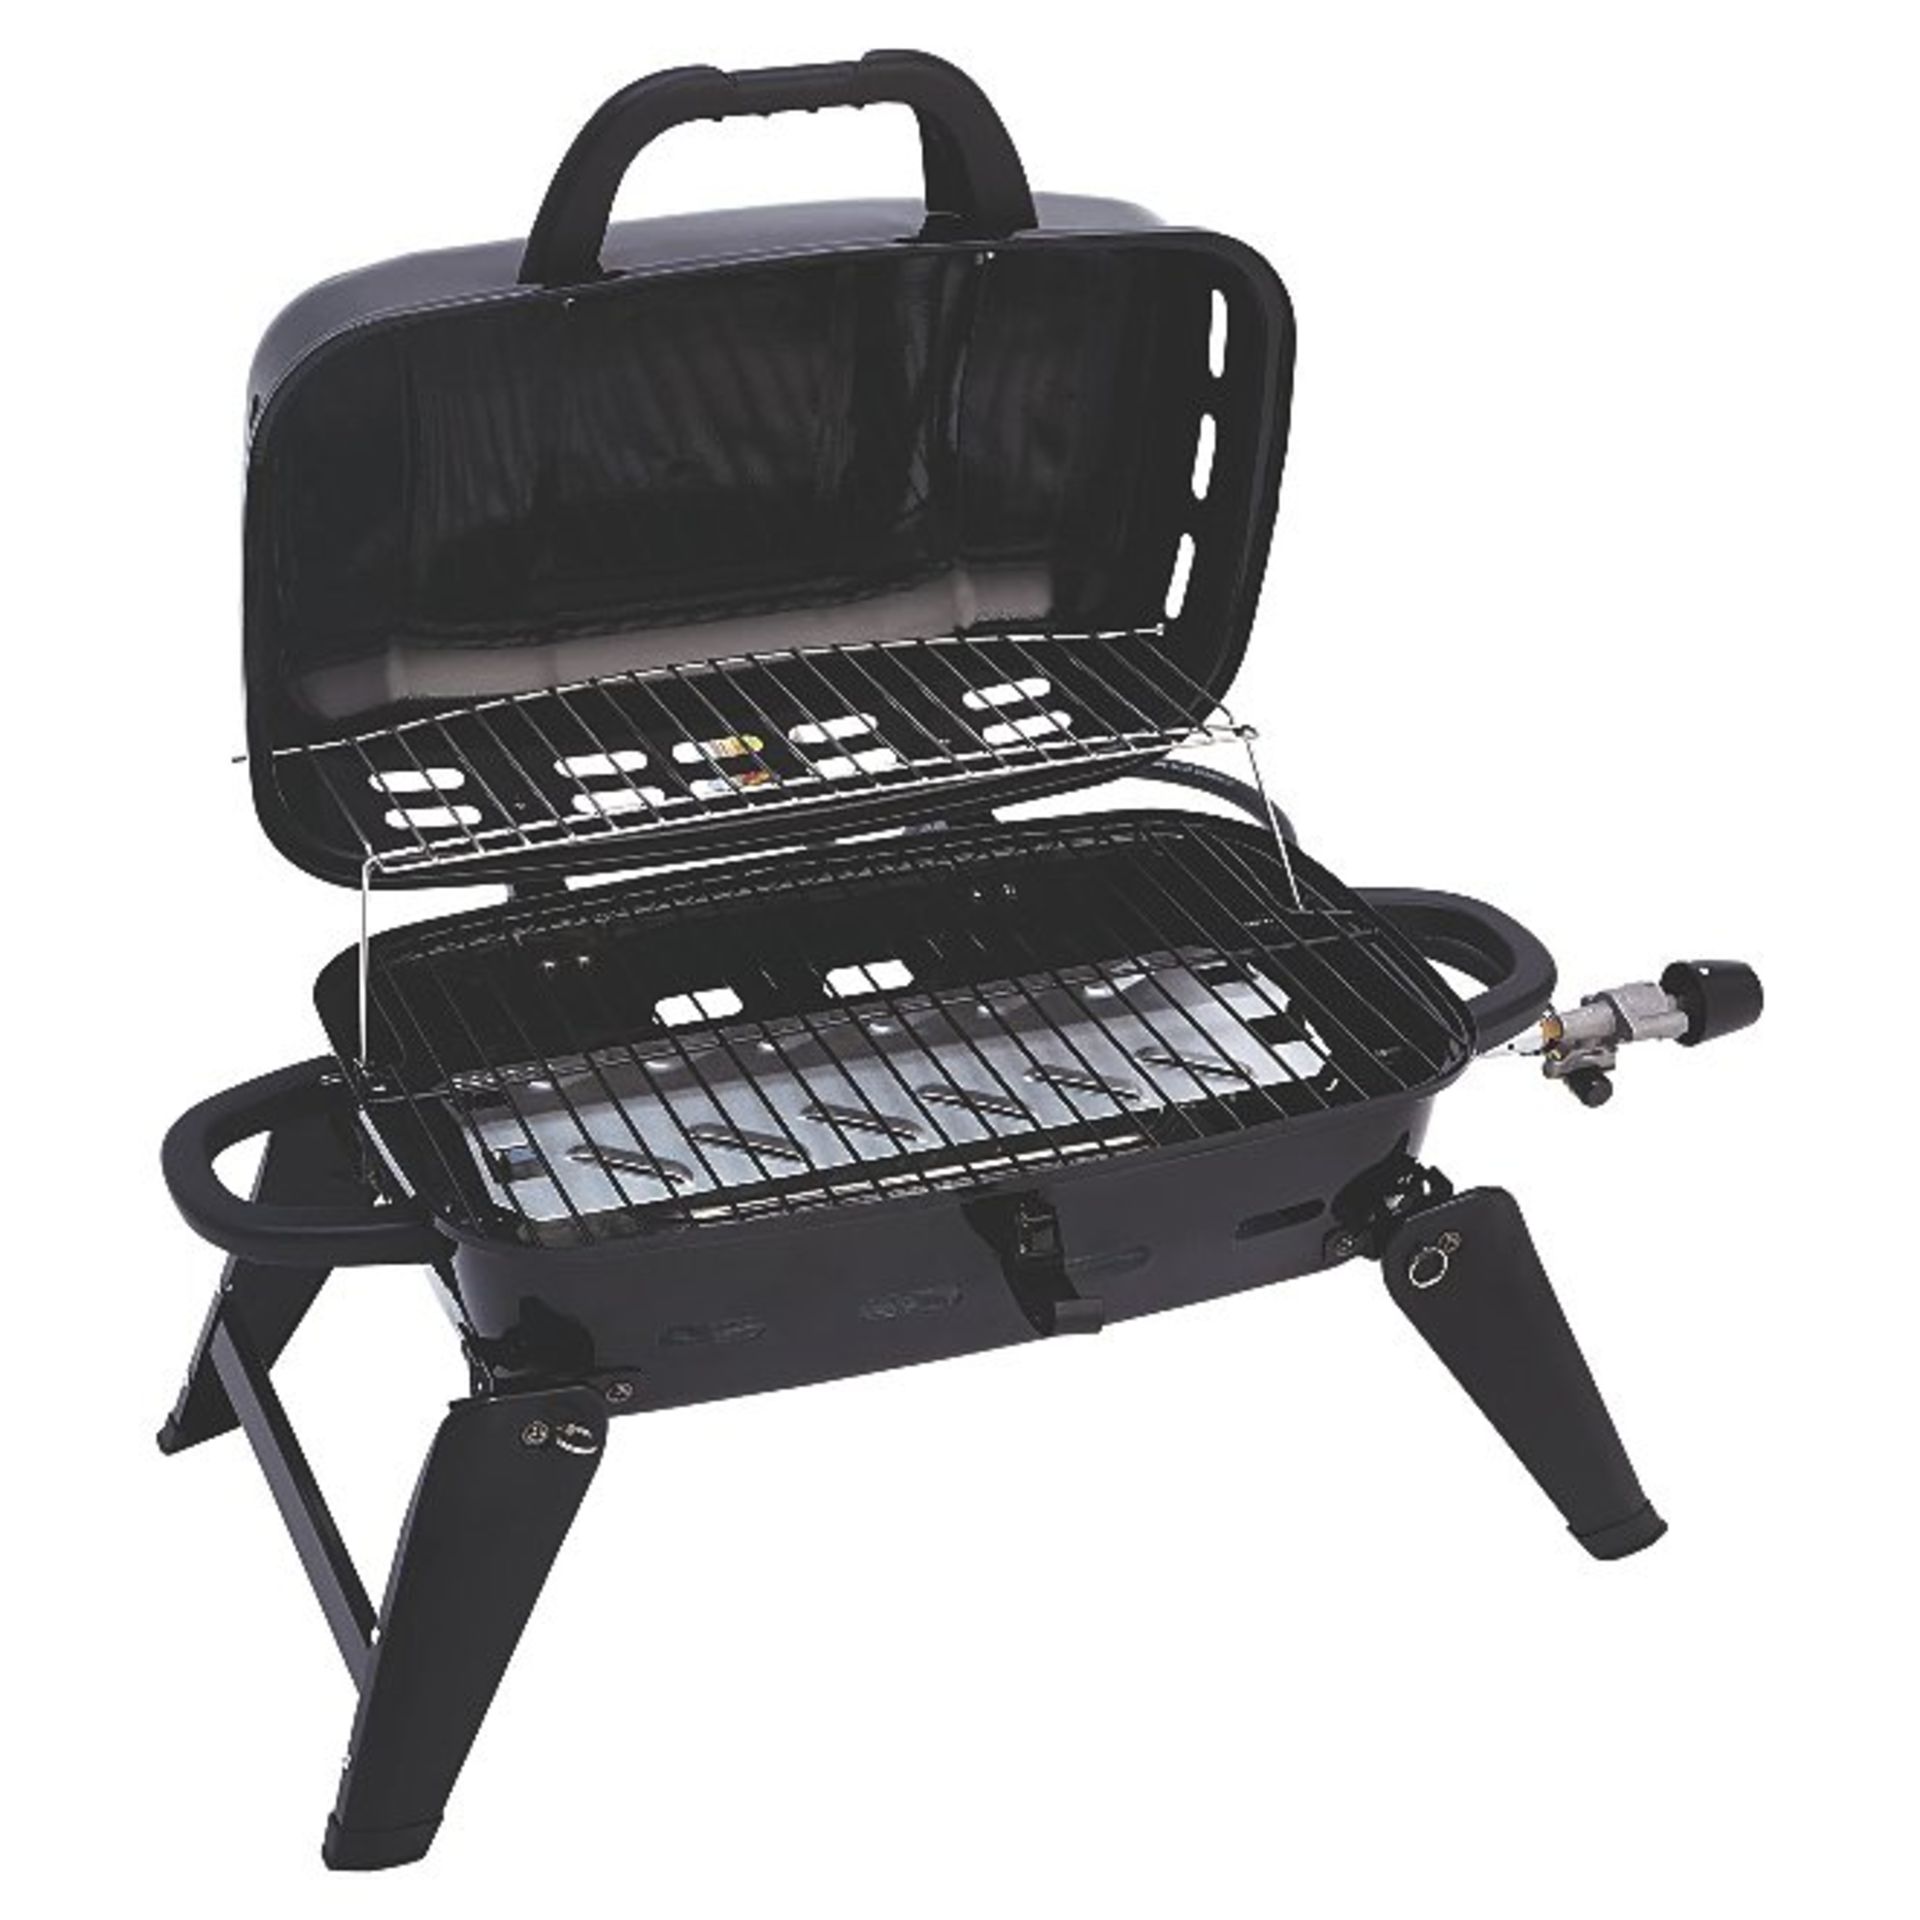 (R8B) 3x Expert Grill Items. 2x 40cm Round Trolly BBQ. 1x Portable Gas Grill. - Image 2 of 3